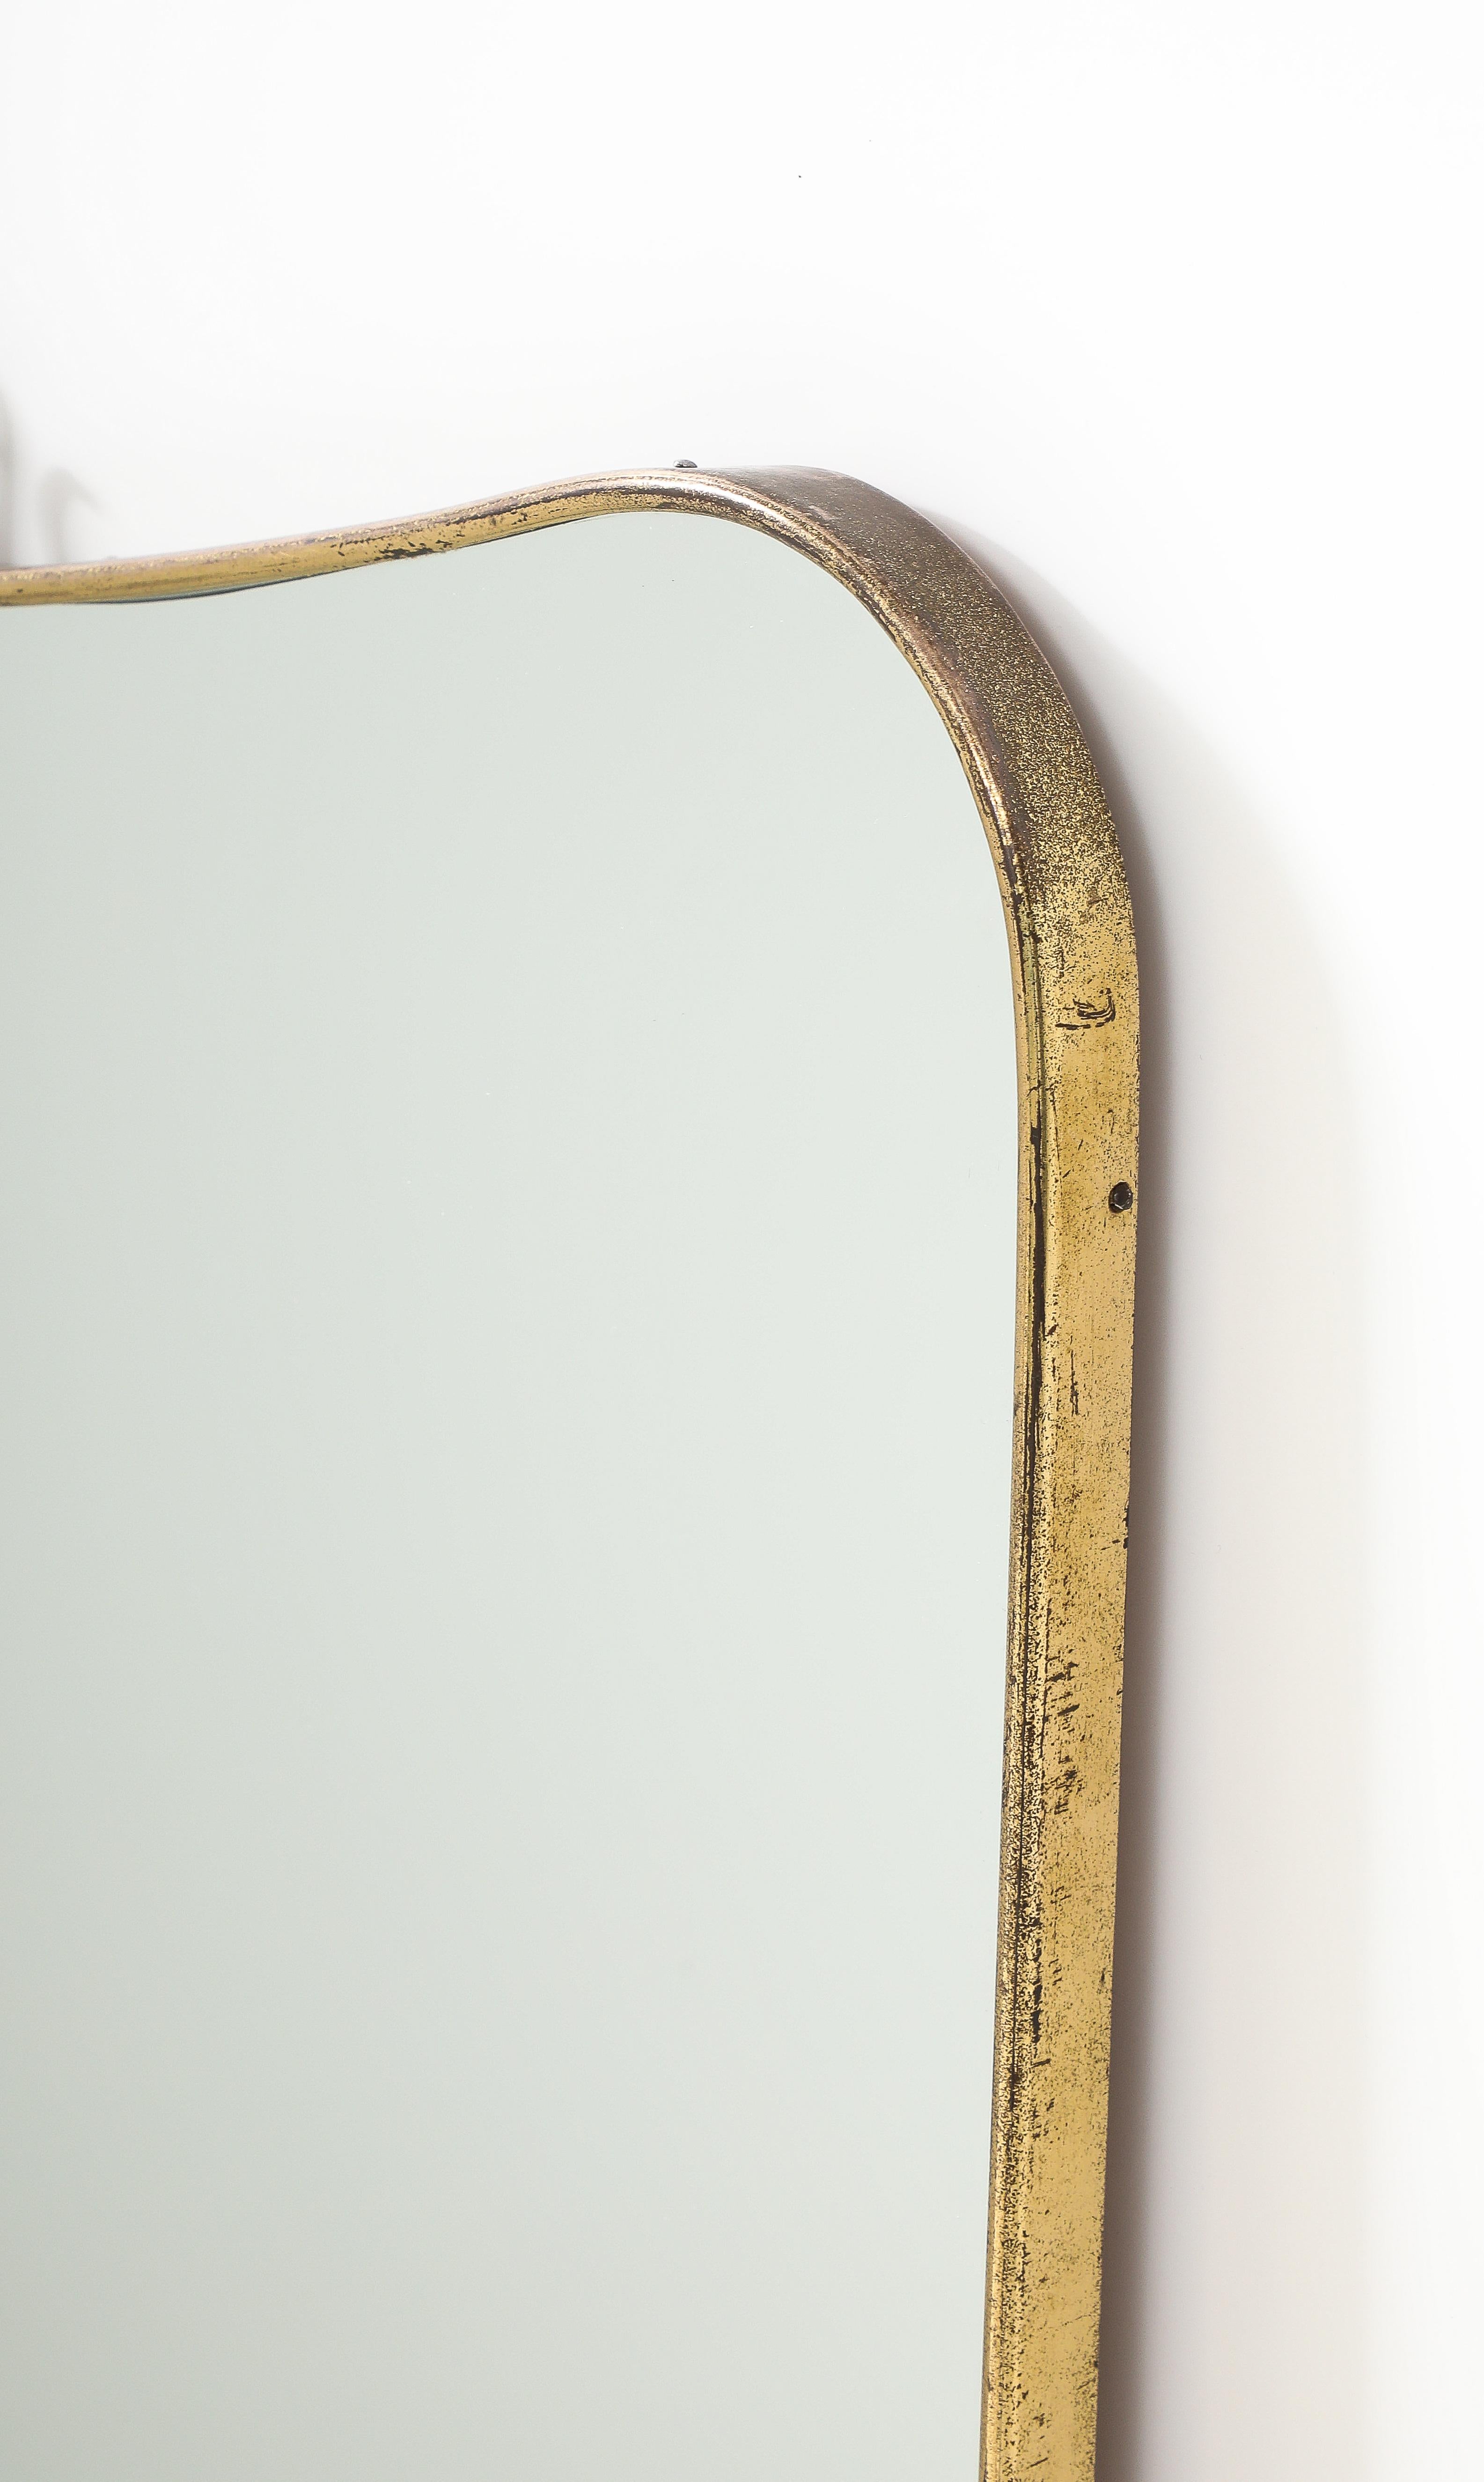 Midcentury Italian Modernist Scroll Top Brass Mirror in the Style of Gio Ponti For Sale 3